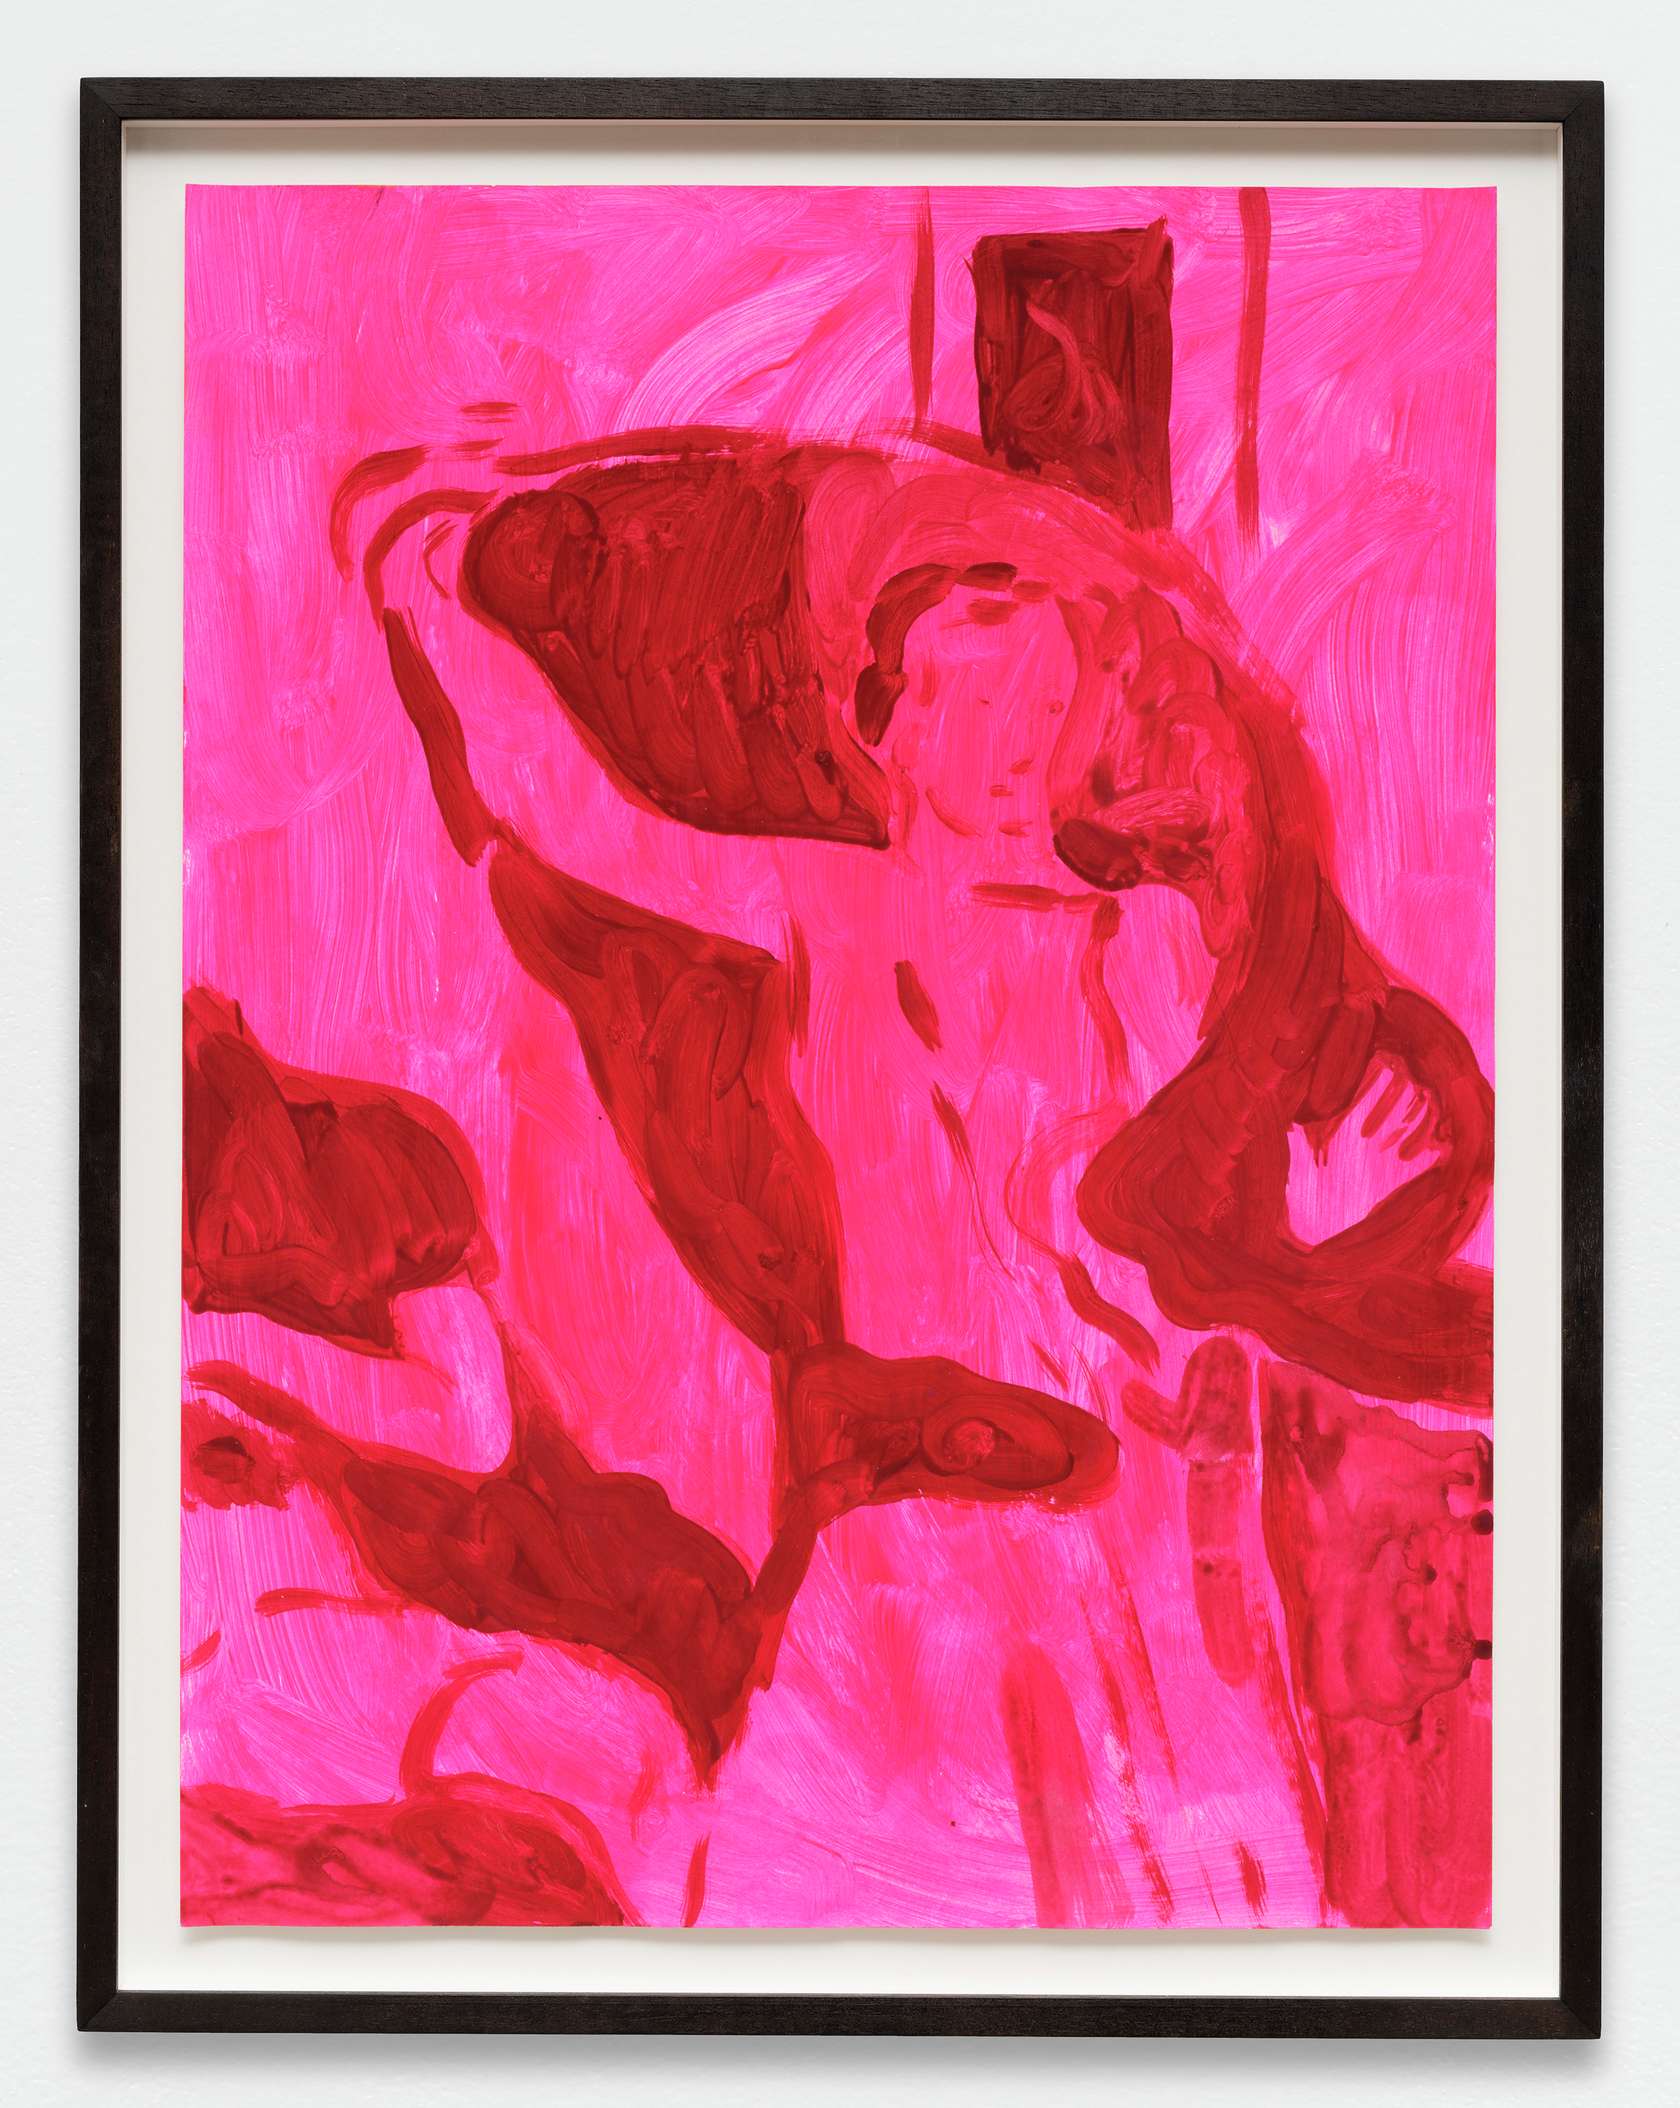 Anthony Cudahy, Villa of the mysteries (pink), 2019 Acrylique sur papier61 × 46 cm / 24 × 18 in.68 × 53 cm / 26 6/8 × 20 7/8 in.